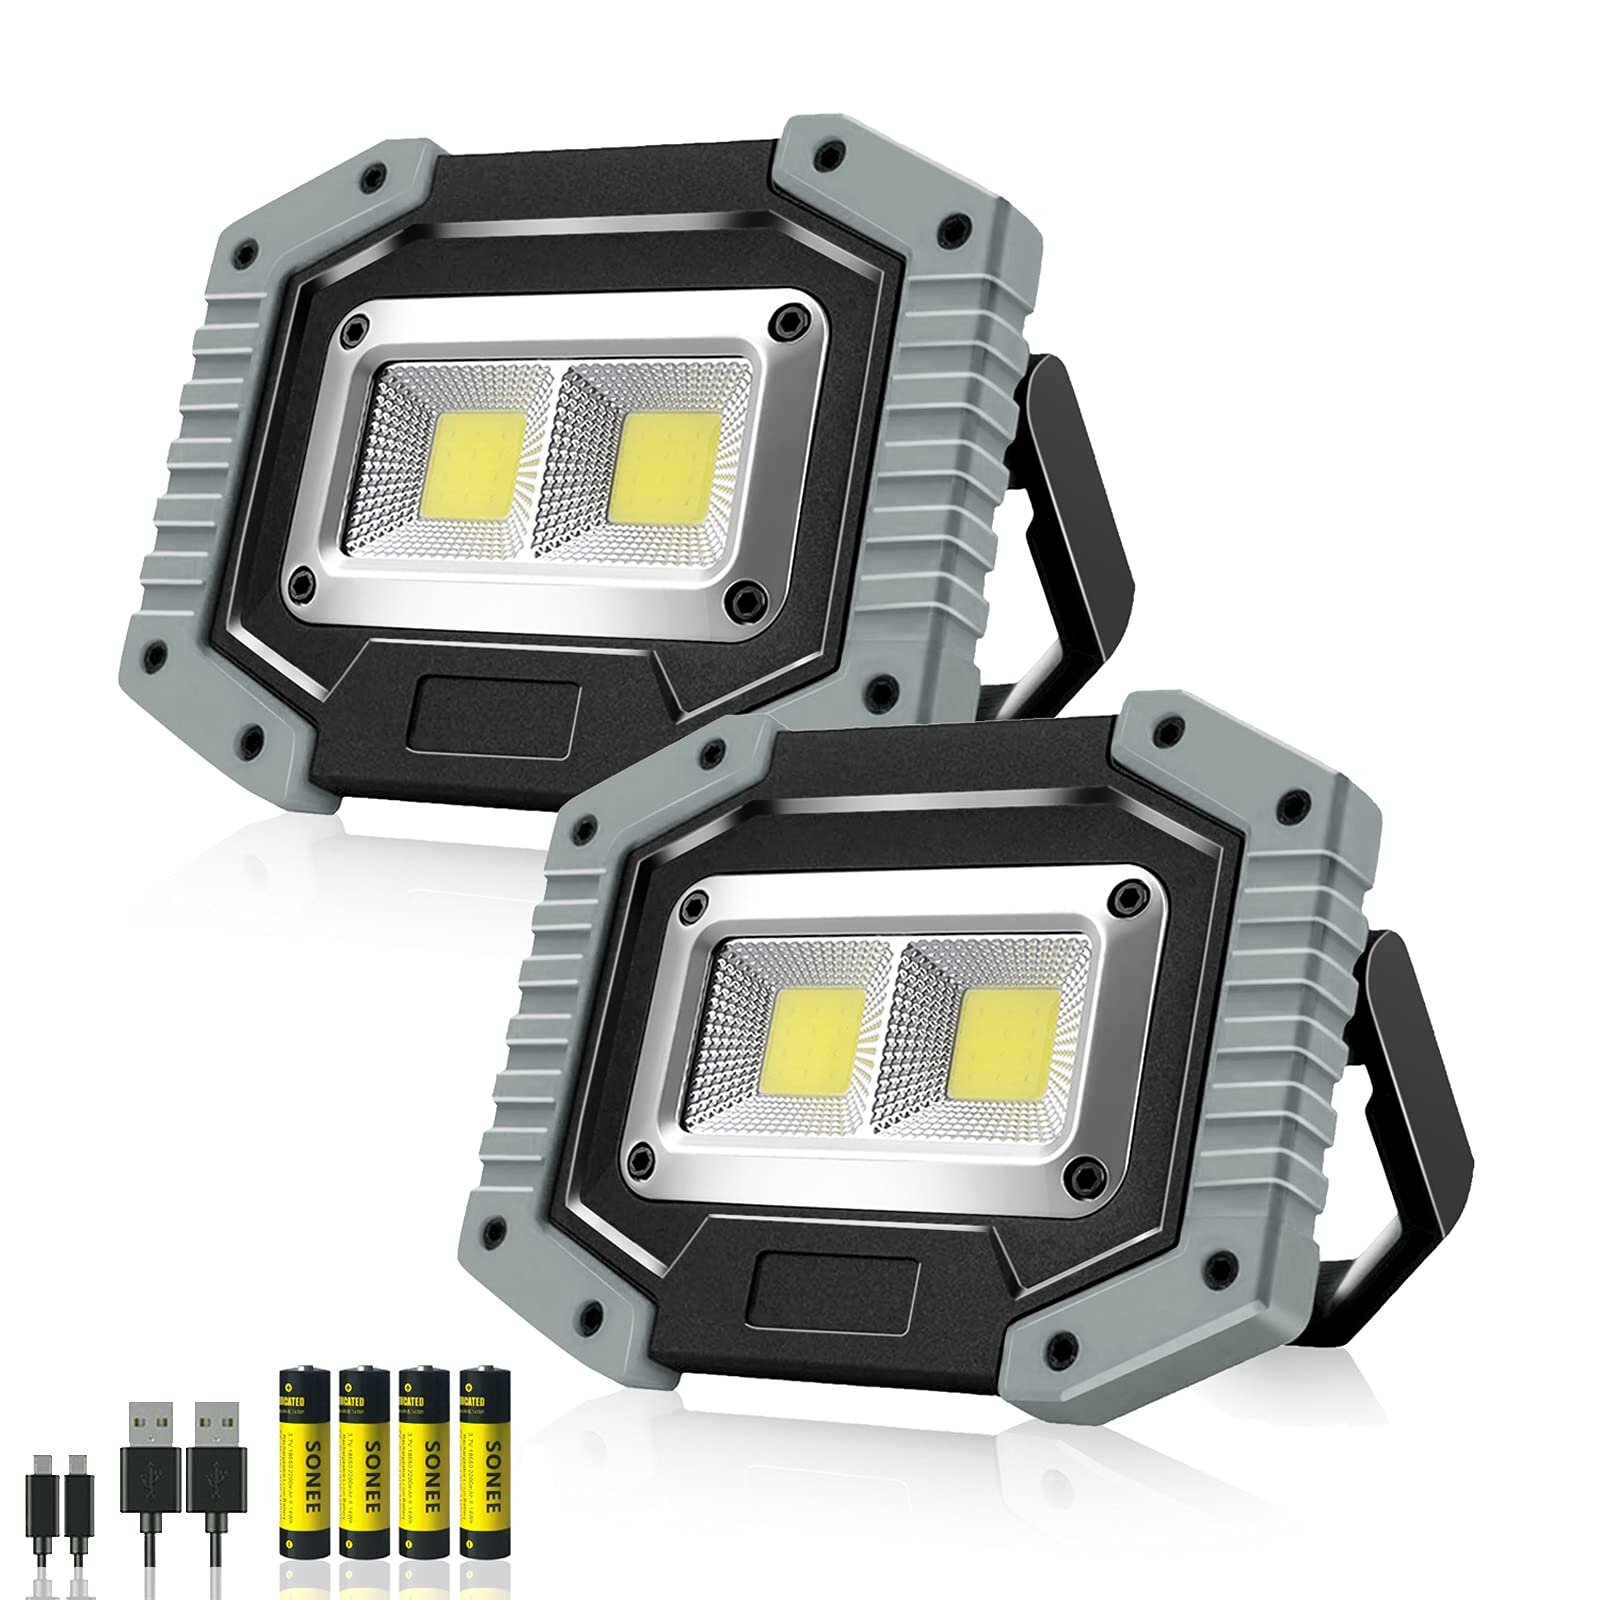 Rechargeable Battery Indoor Solar Powered 5 Ultra Bright LED Light Garage Lamp